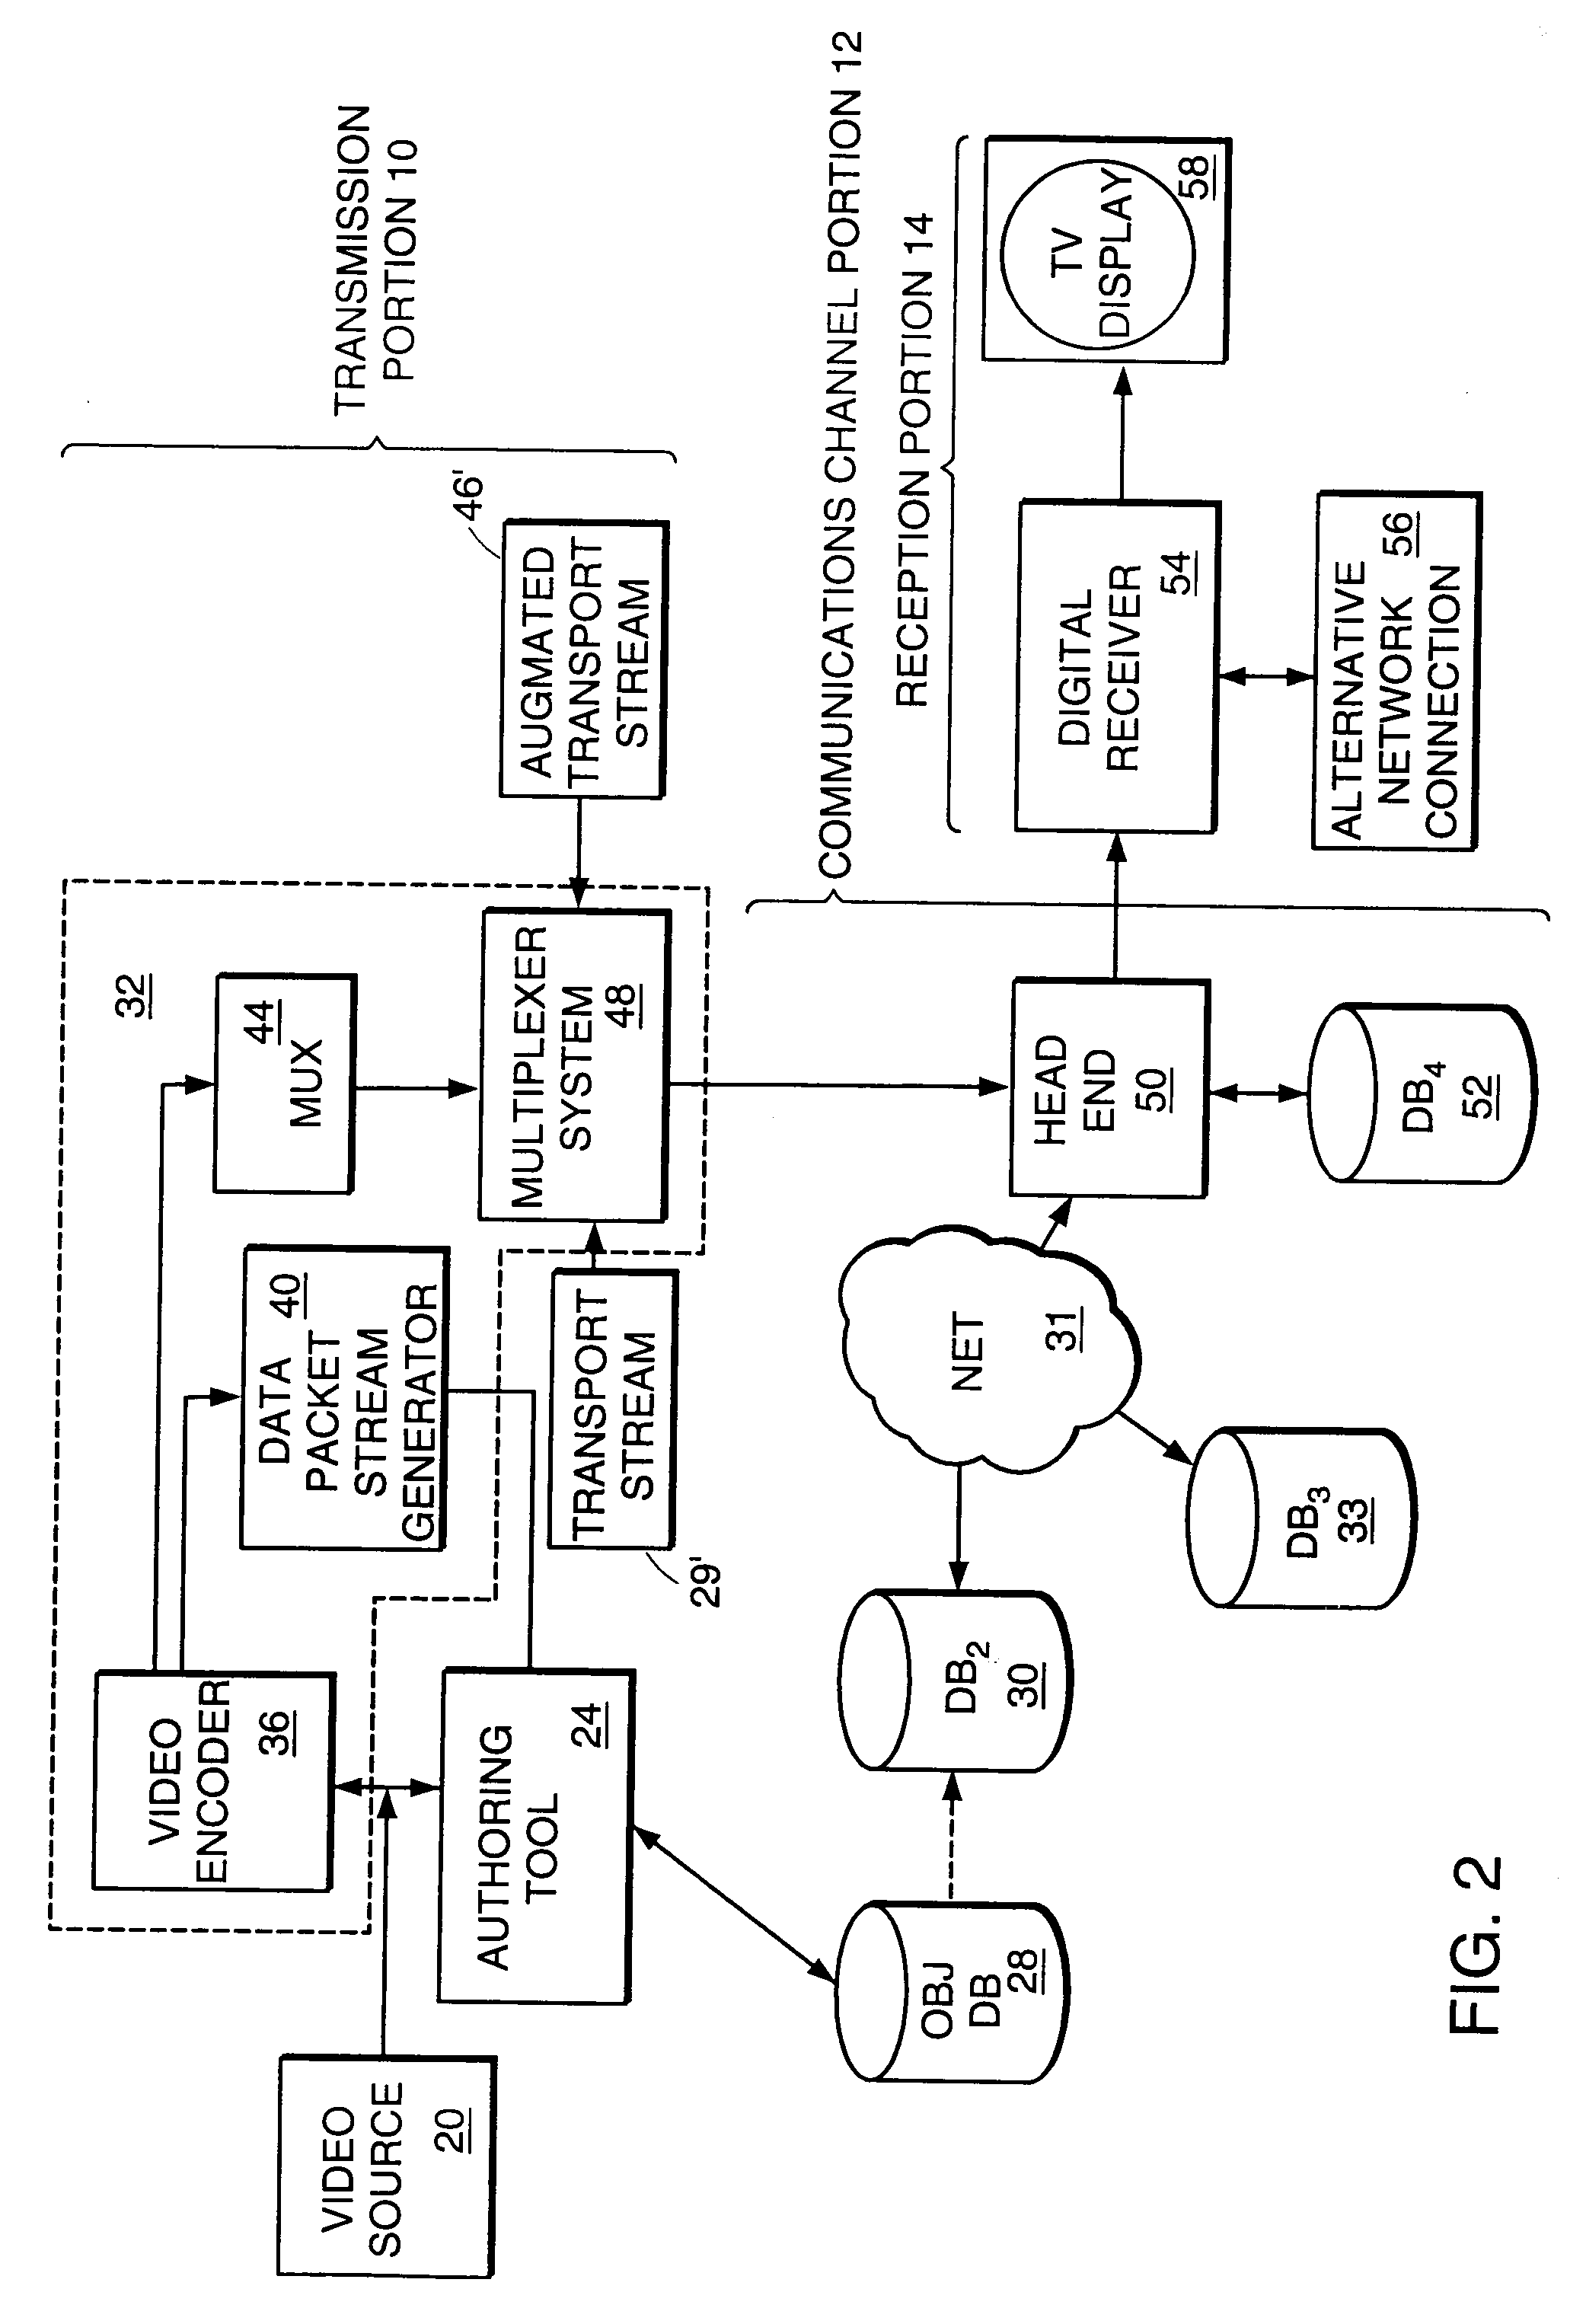 Method and Apparatus for Interaction with Hyperlinks in a Television Broadcast